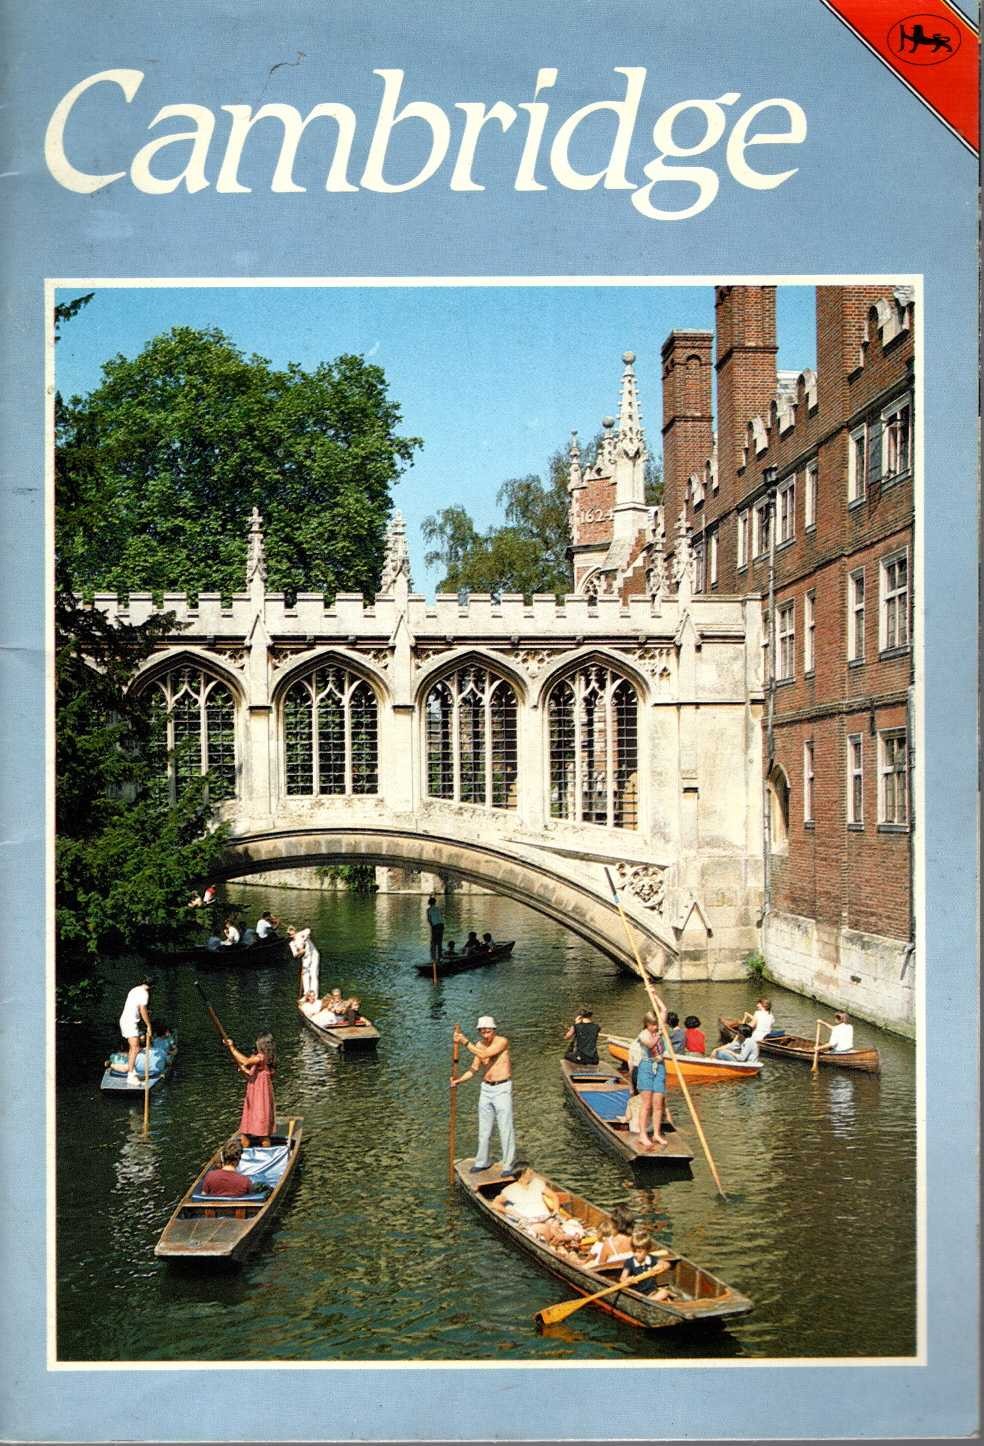 \ CAMBRIDGE by Kenneth Cooper front book cover image